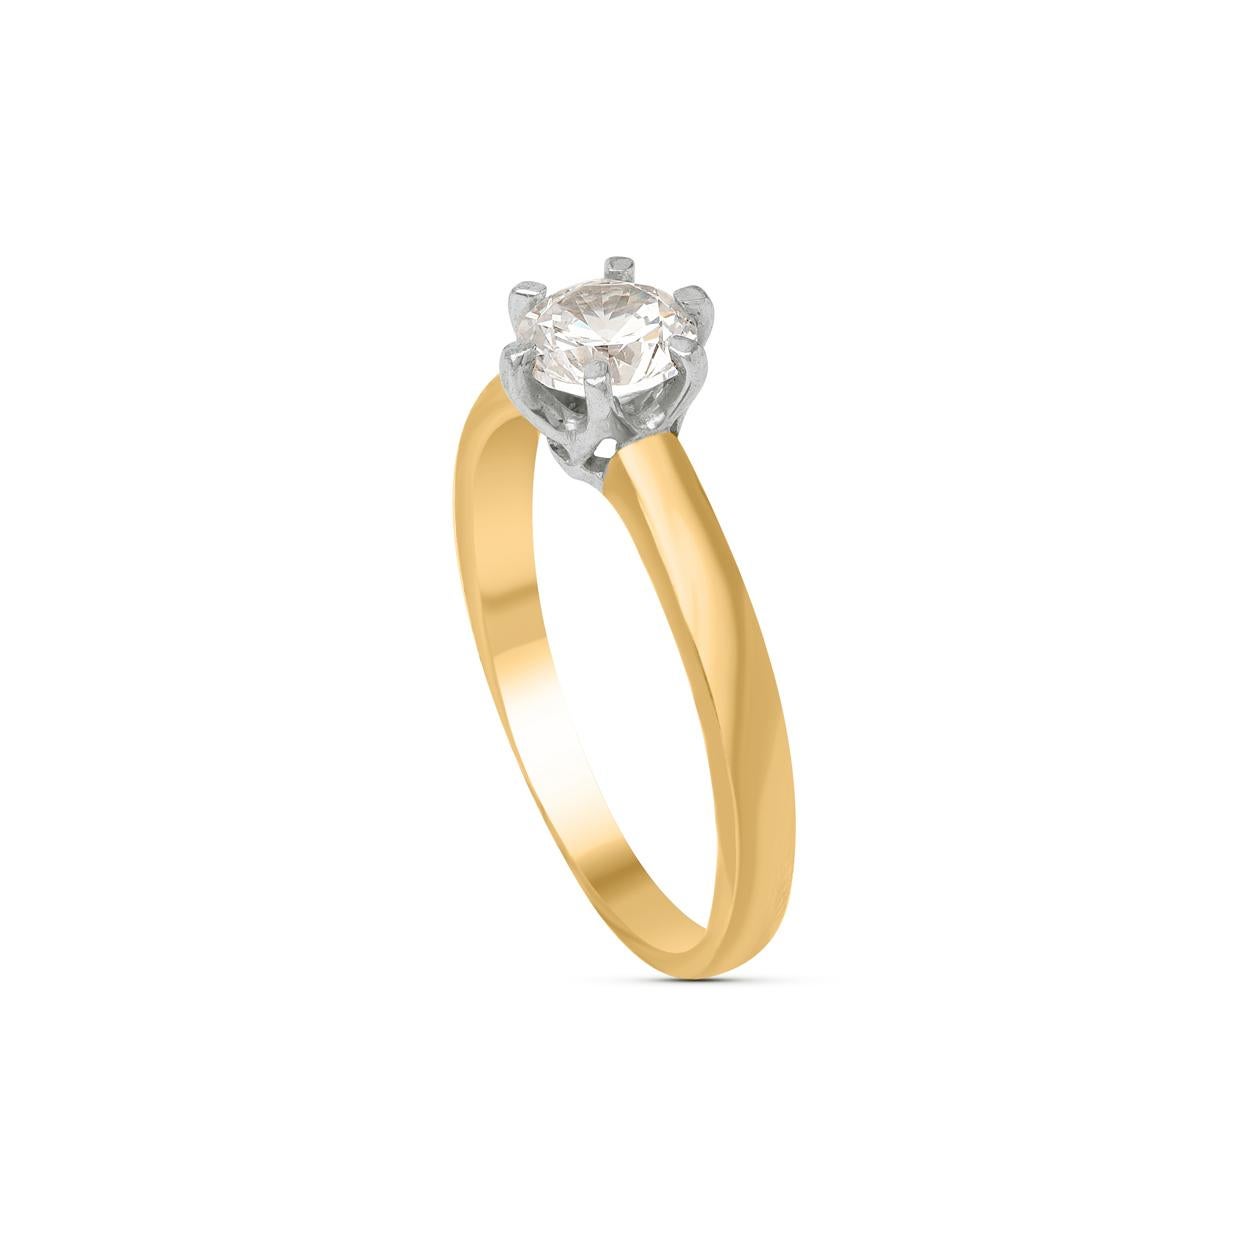 Scintillating with one brilliant-cut diamond beautifully set in prong setting and handcrafted by our in-house experts in 18 kt yellow gold. Diamonds are graded H-I Color, I1 Clarity. 

Metal color and ring size can be customized on request. 

This